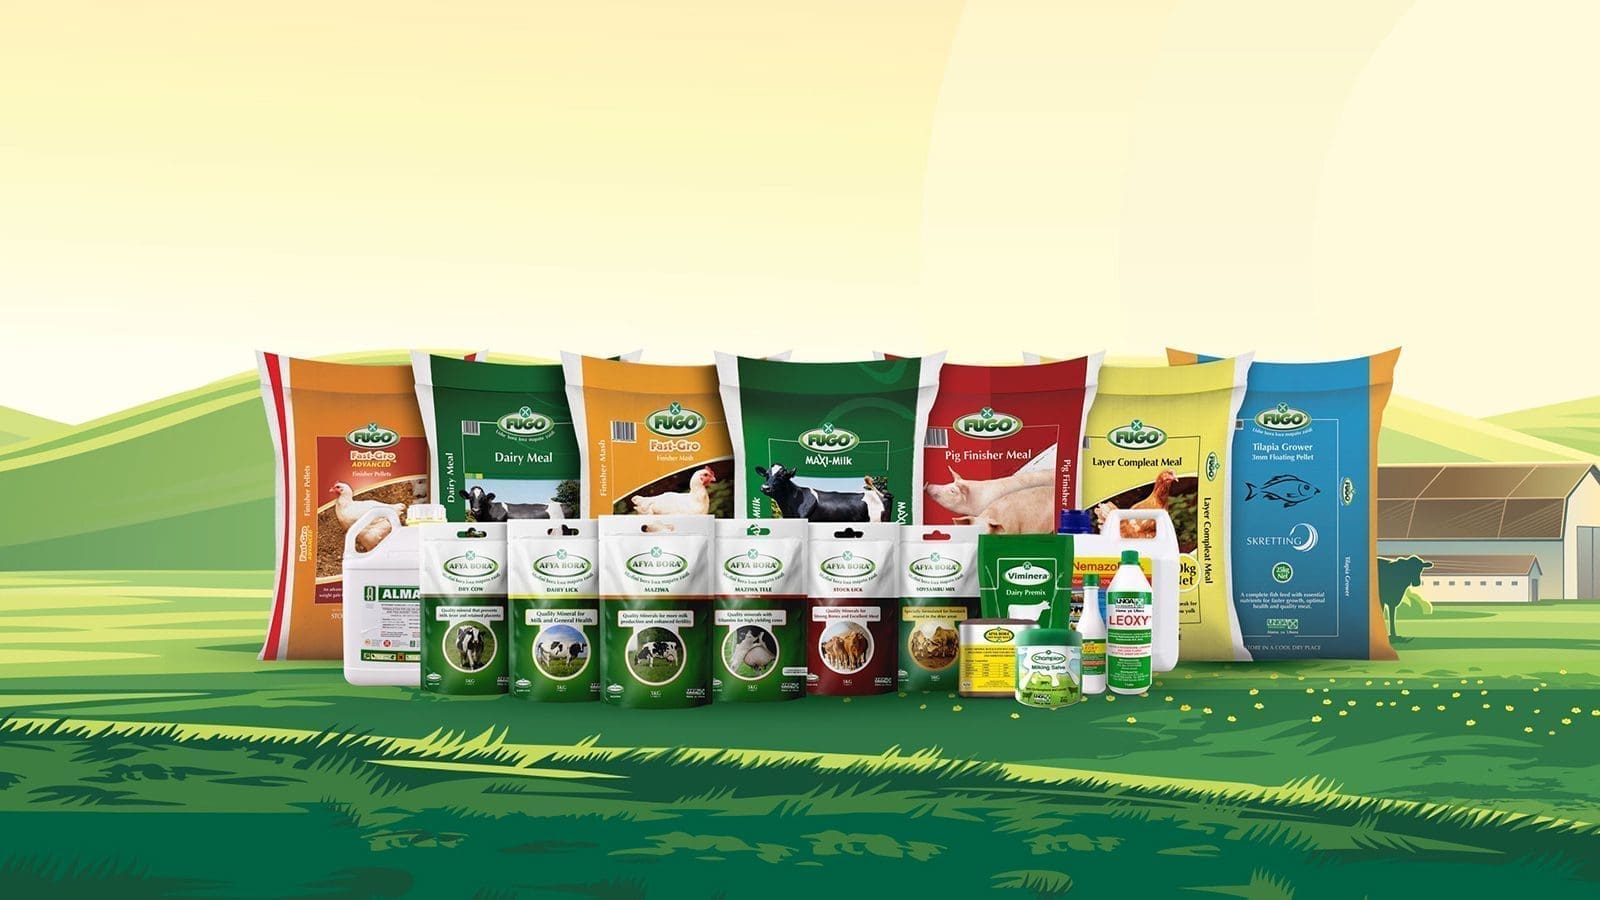 Unga Group, Nutreco receives go ahead for formation of animal feed JV in Kenya, Uganda